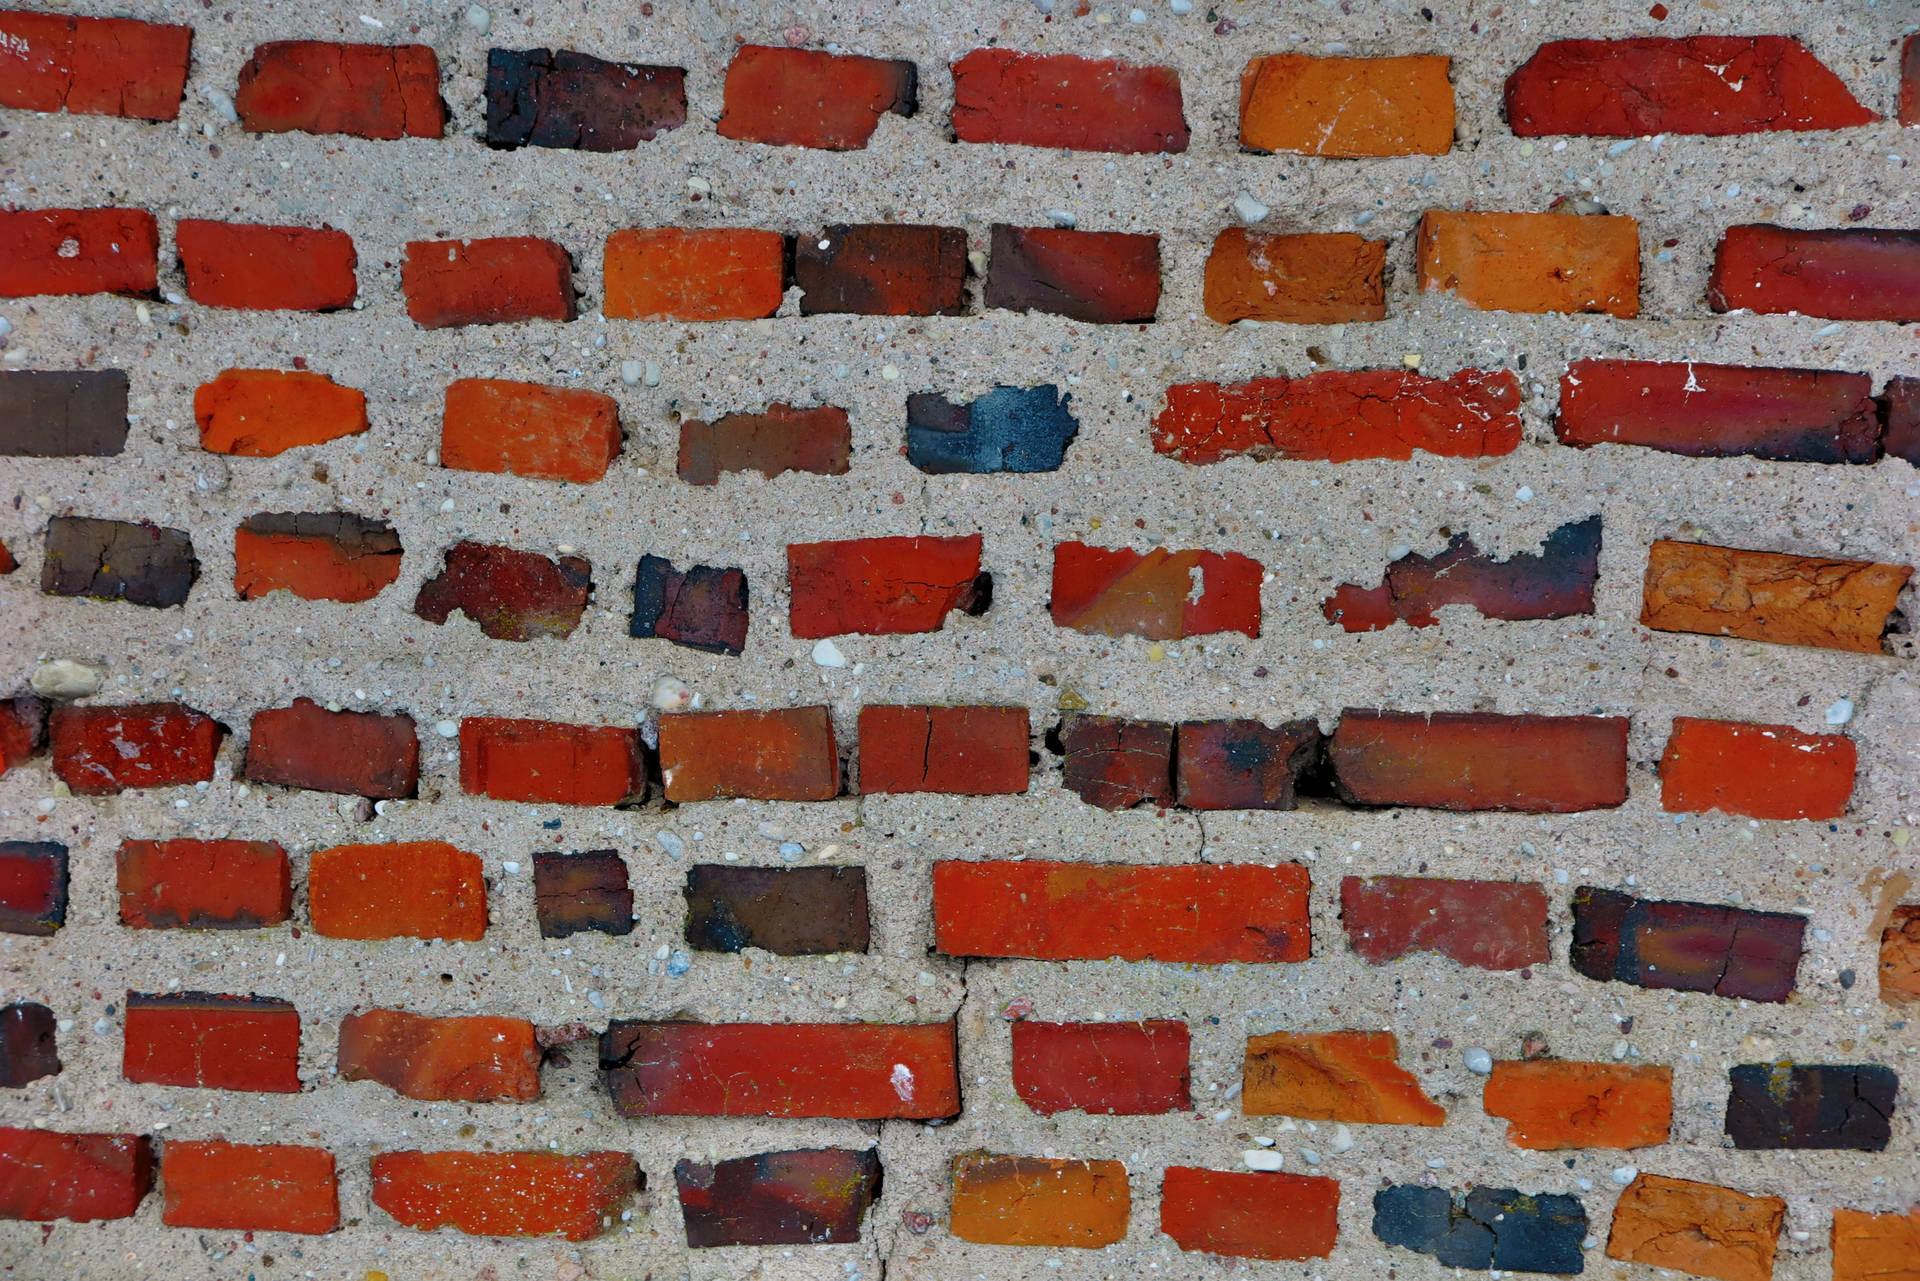 Brick 4352X2904 Wallpaper and Background Image